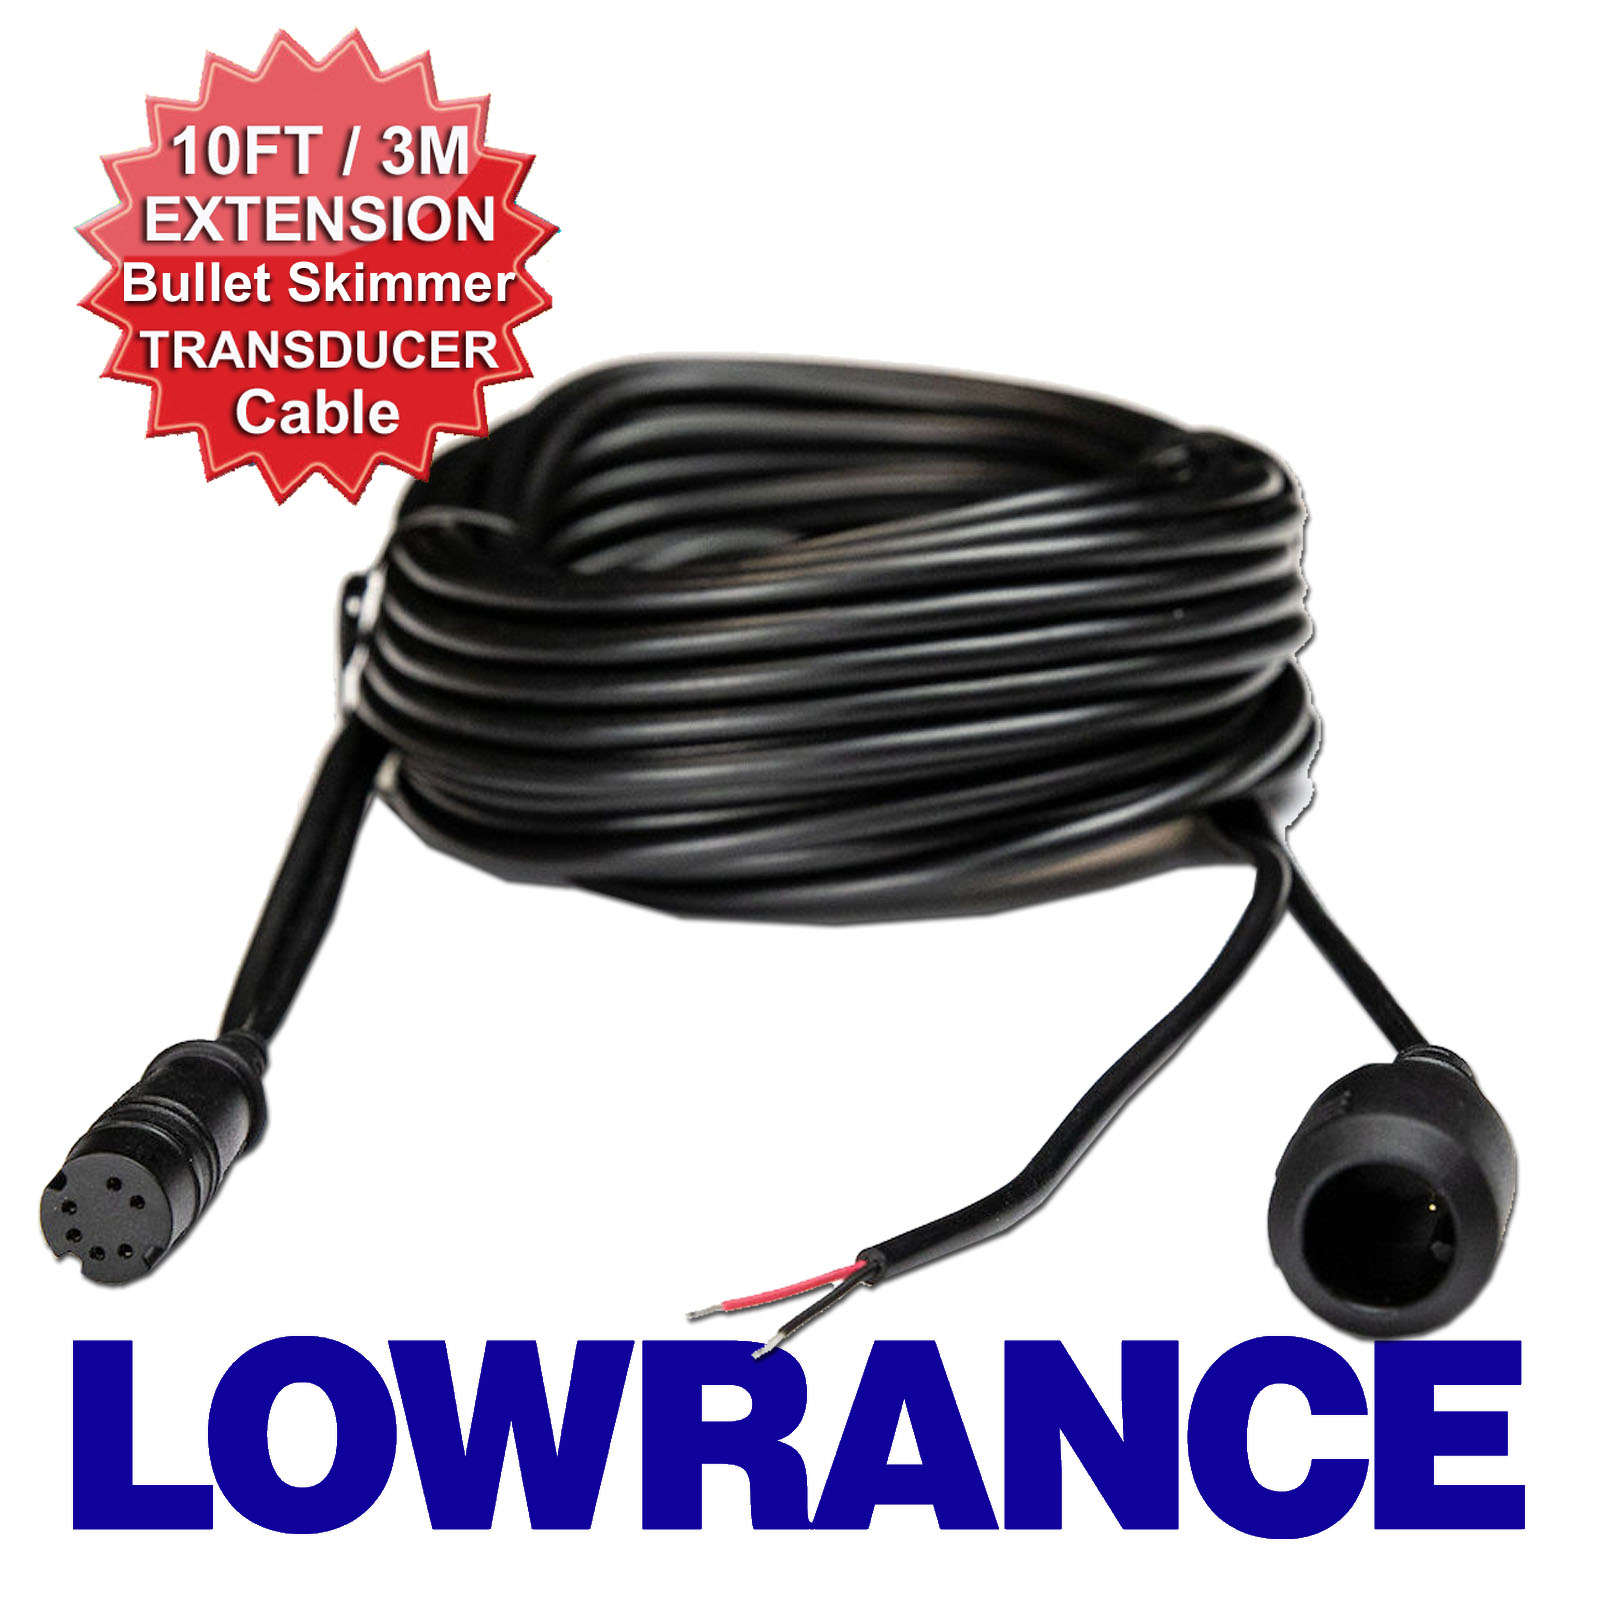 Lowrance Hook 2 4 & 4X 10ft Extension Cable for Bullet Skimmer